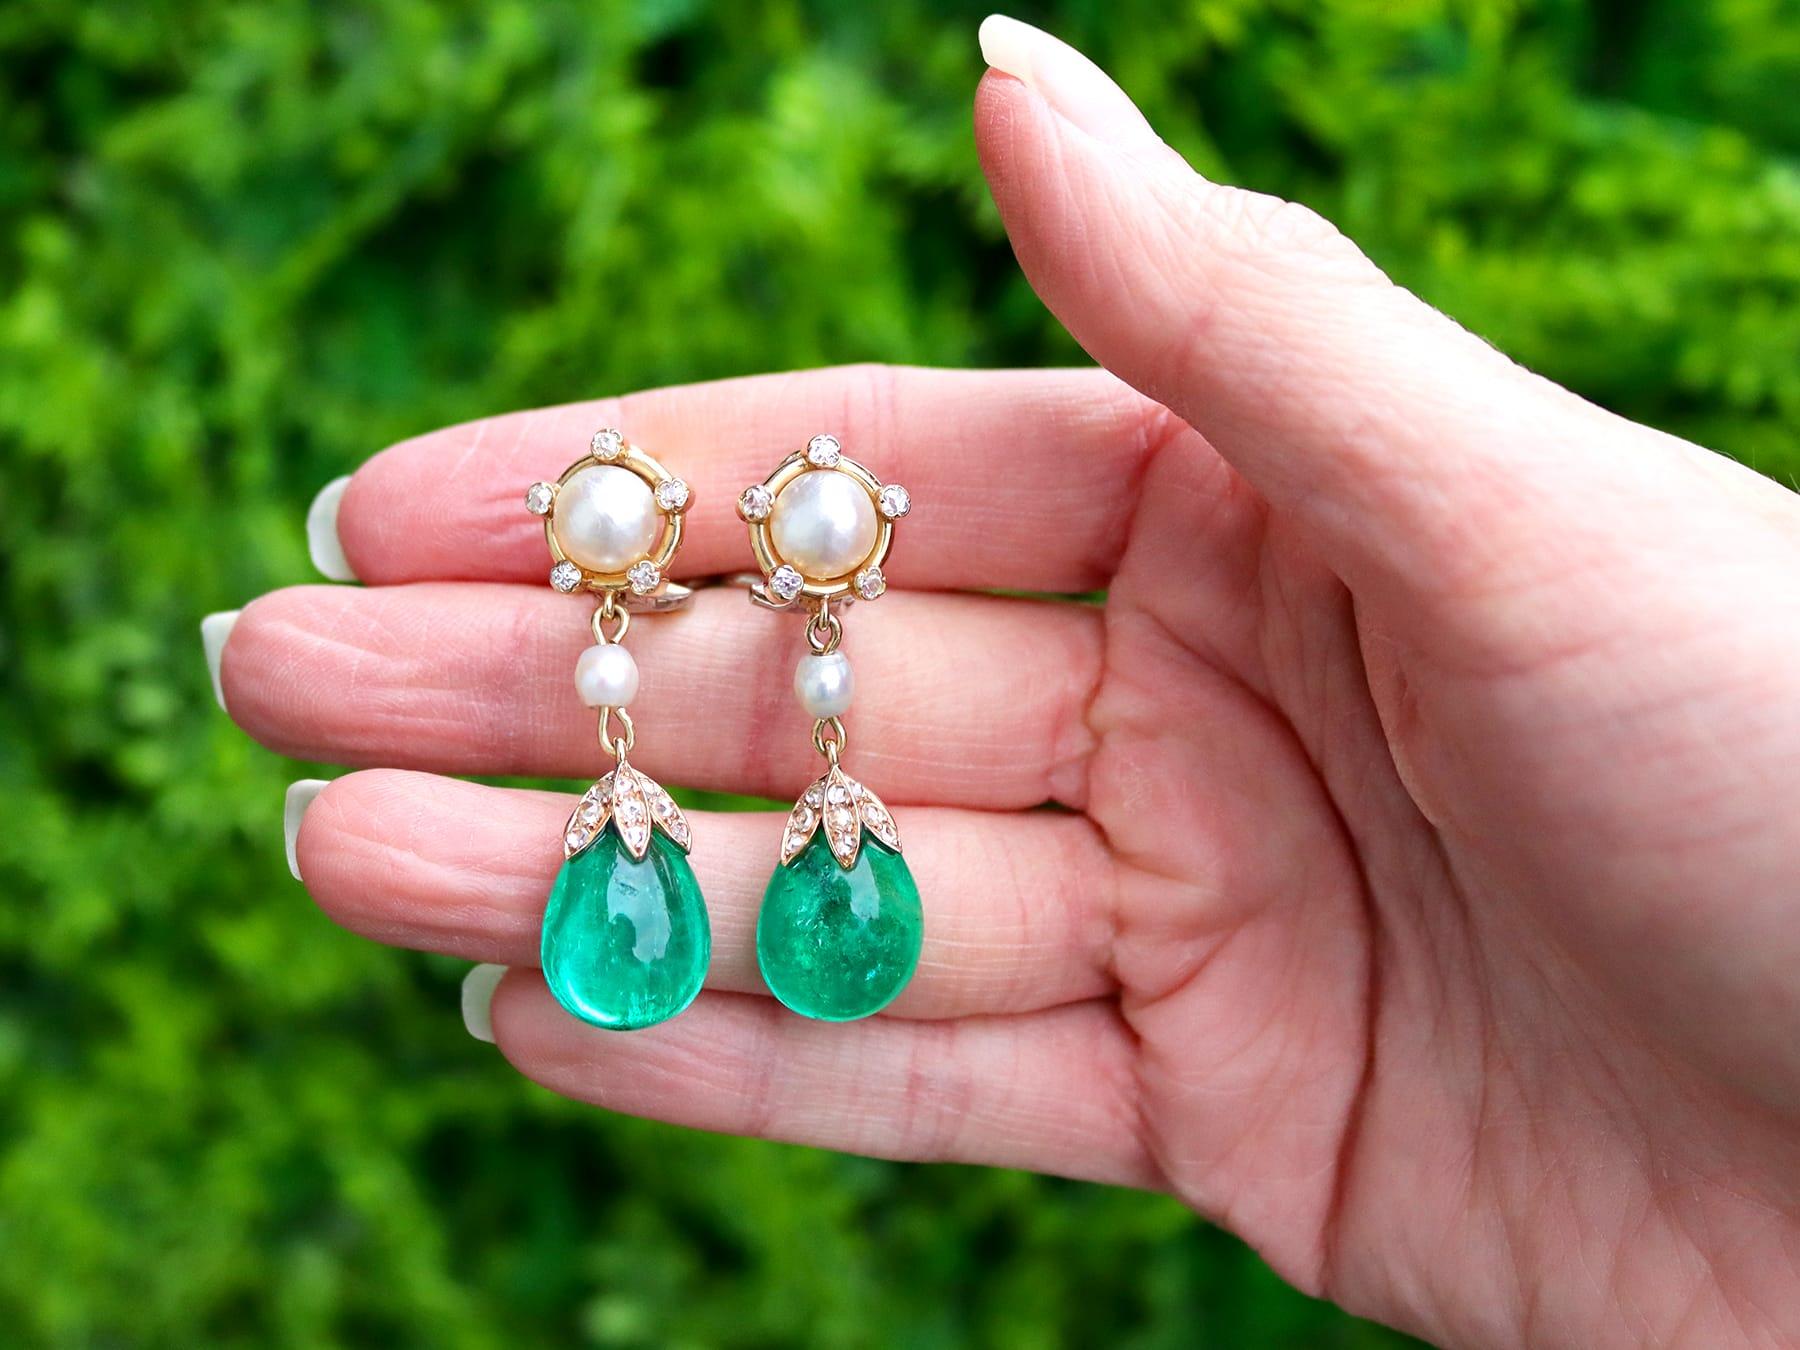 A stunning, fine and impressive pair of antique 13.82 carat Colombian emerald, saltwater pearl and 0.60 carat diamond, 18 karat yellow gold drop earrings; part of our diverse Victorian jewellery collections.

These stunning, fine and impressive